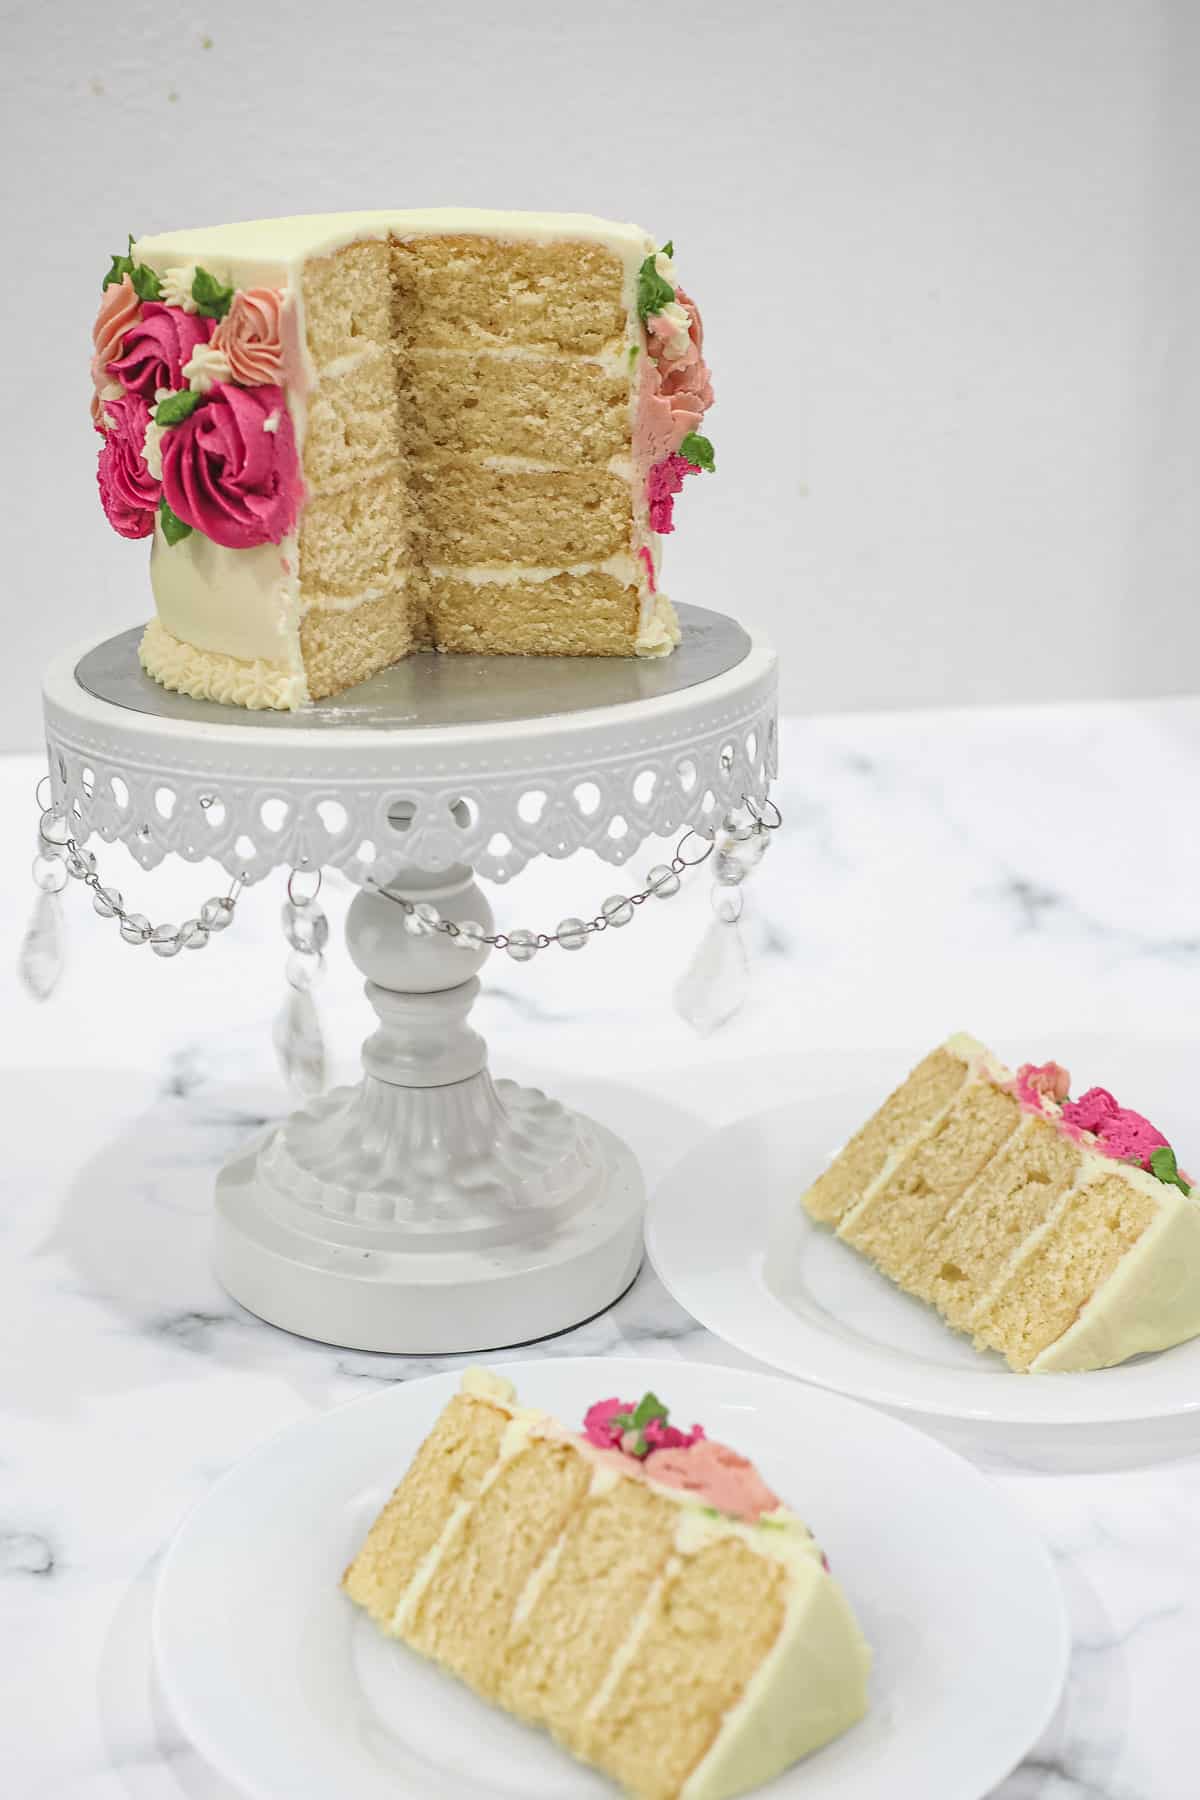 A 4 layer cake on a cake stand, with 2 slices cut out